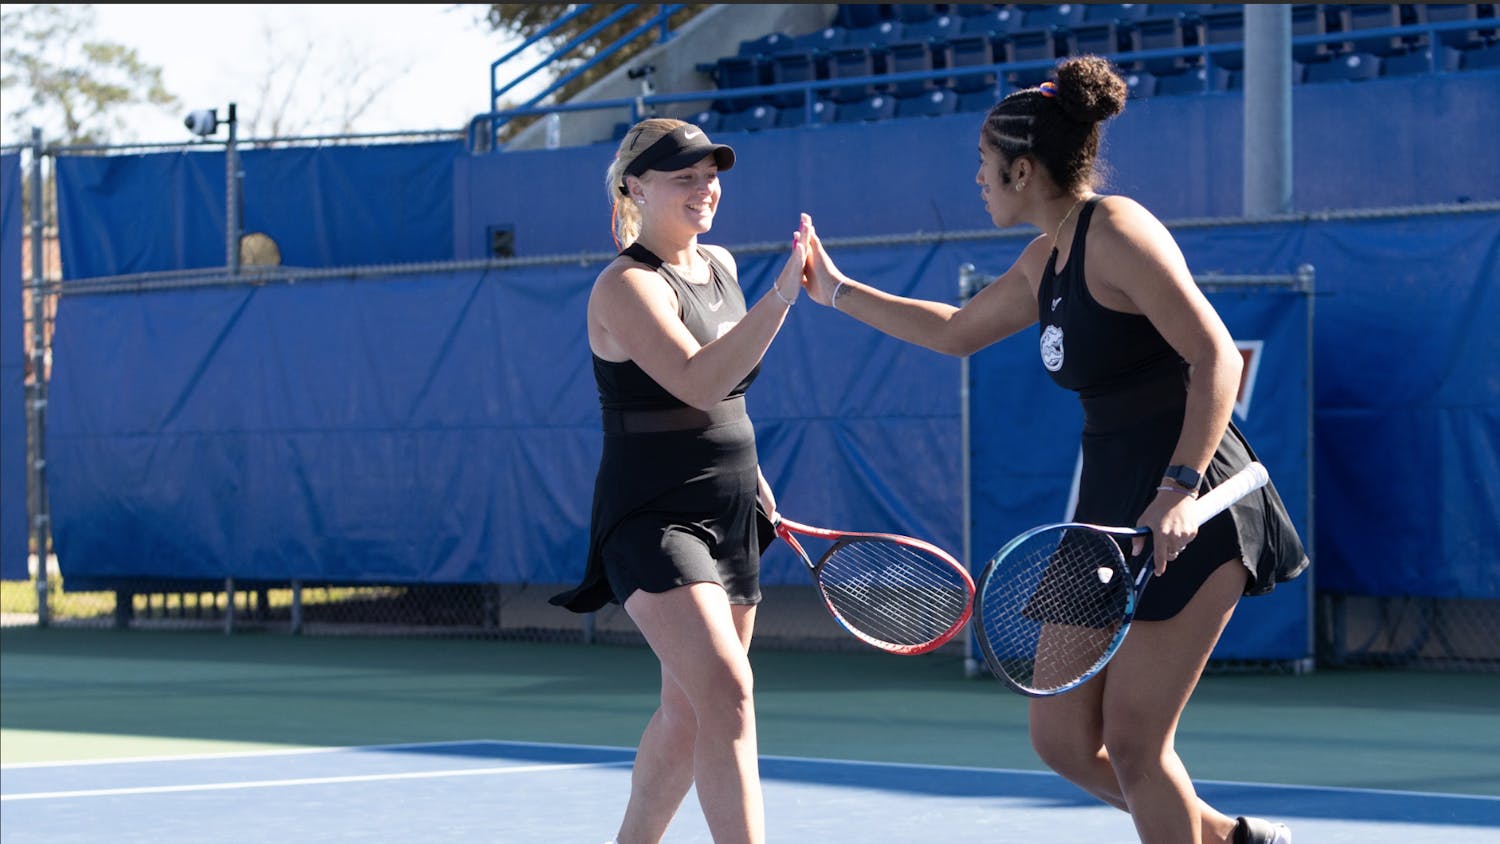 Florida’s pair of freshmen Malwina Rowinska (left) and Qavia Lopez (right) celebrate winning a doubles point in the Gators women’s tennis match against Baylor.